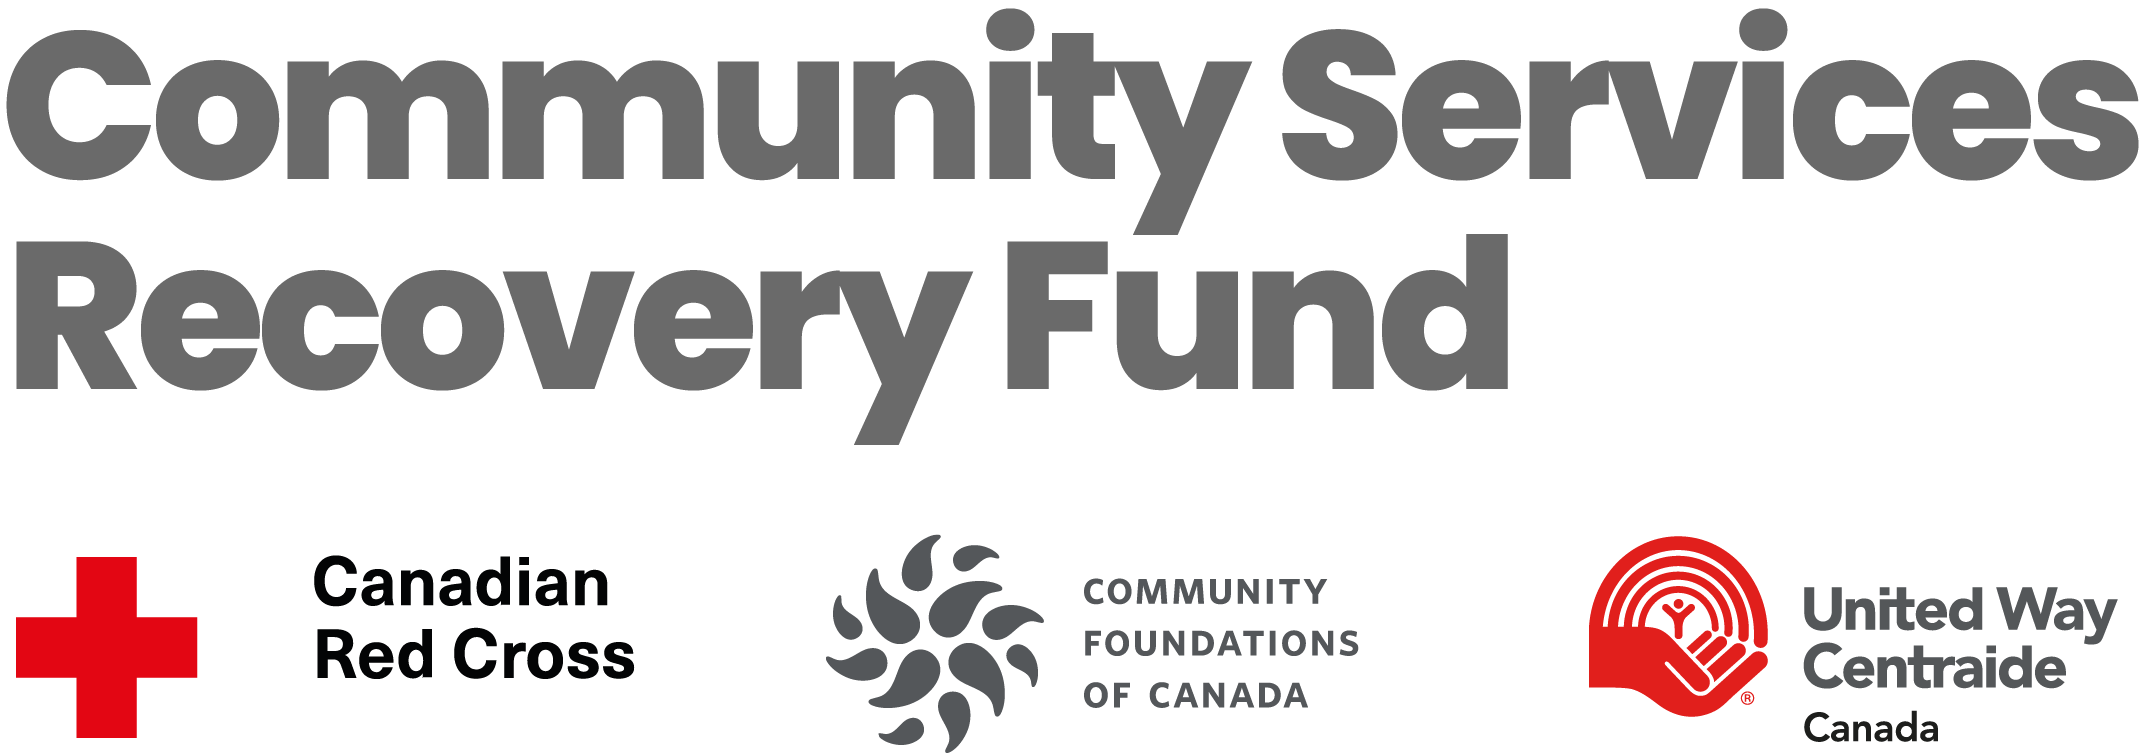 community-services-recovery-fund